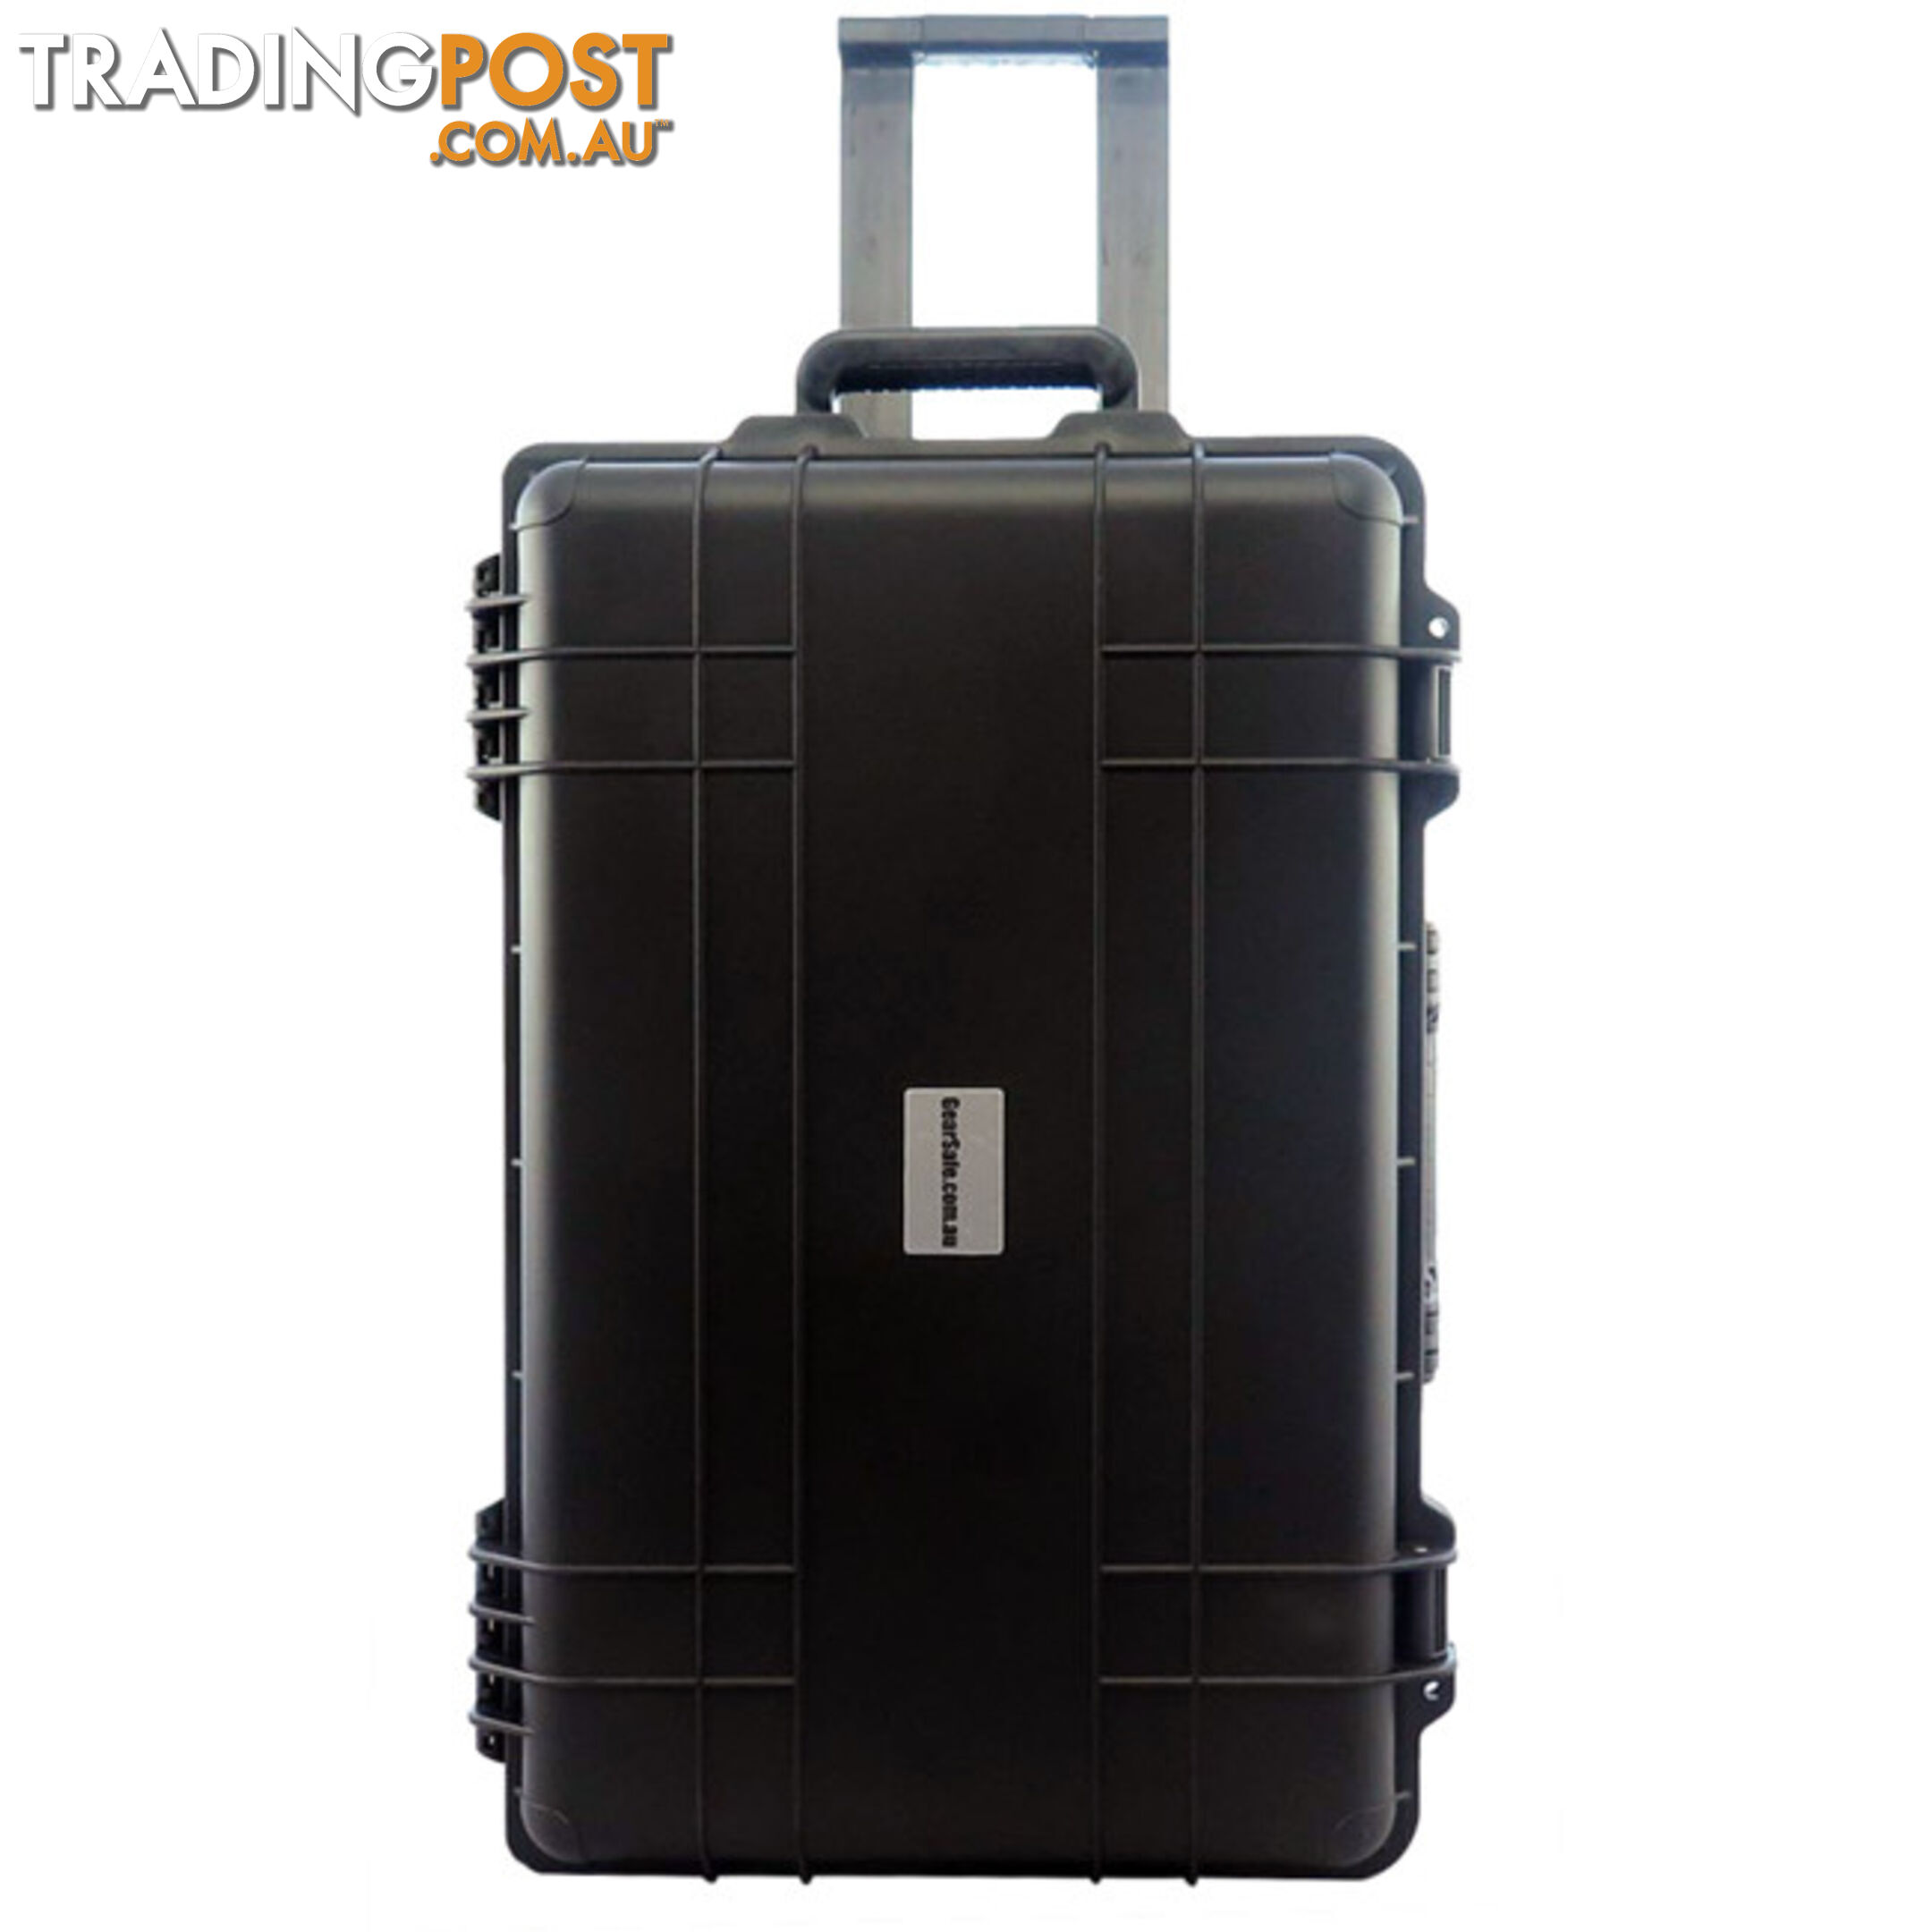 GS028 625X 420X 340 PROTECTIVE BLACK TROLLY CASE WITH FOAM GEARSAFE